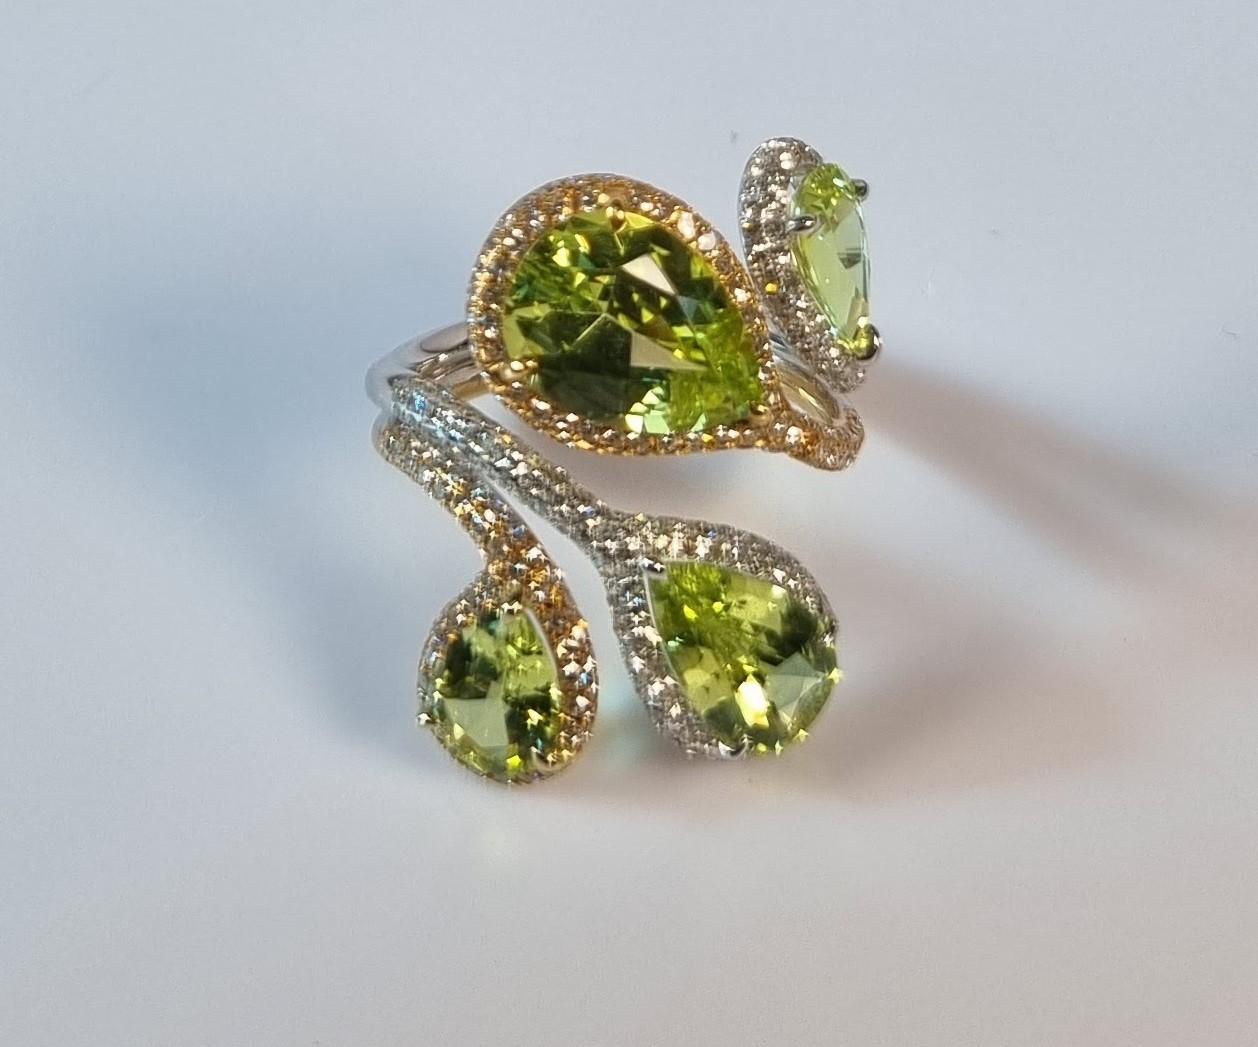 Green Chrysoberyl twisted  Ring with diamonds and bicolor gold
Total gems 5.60cts
Diamonds 307 E/F VVS total 1.68ct
Weight 6.92gr
Size 55 Europe 7,1/2 US
Irama Pradera is a dynamic and outgoing designer from Spain that searches always for the best